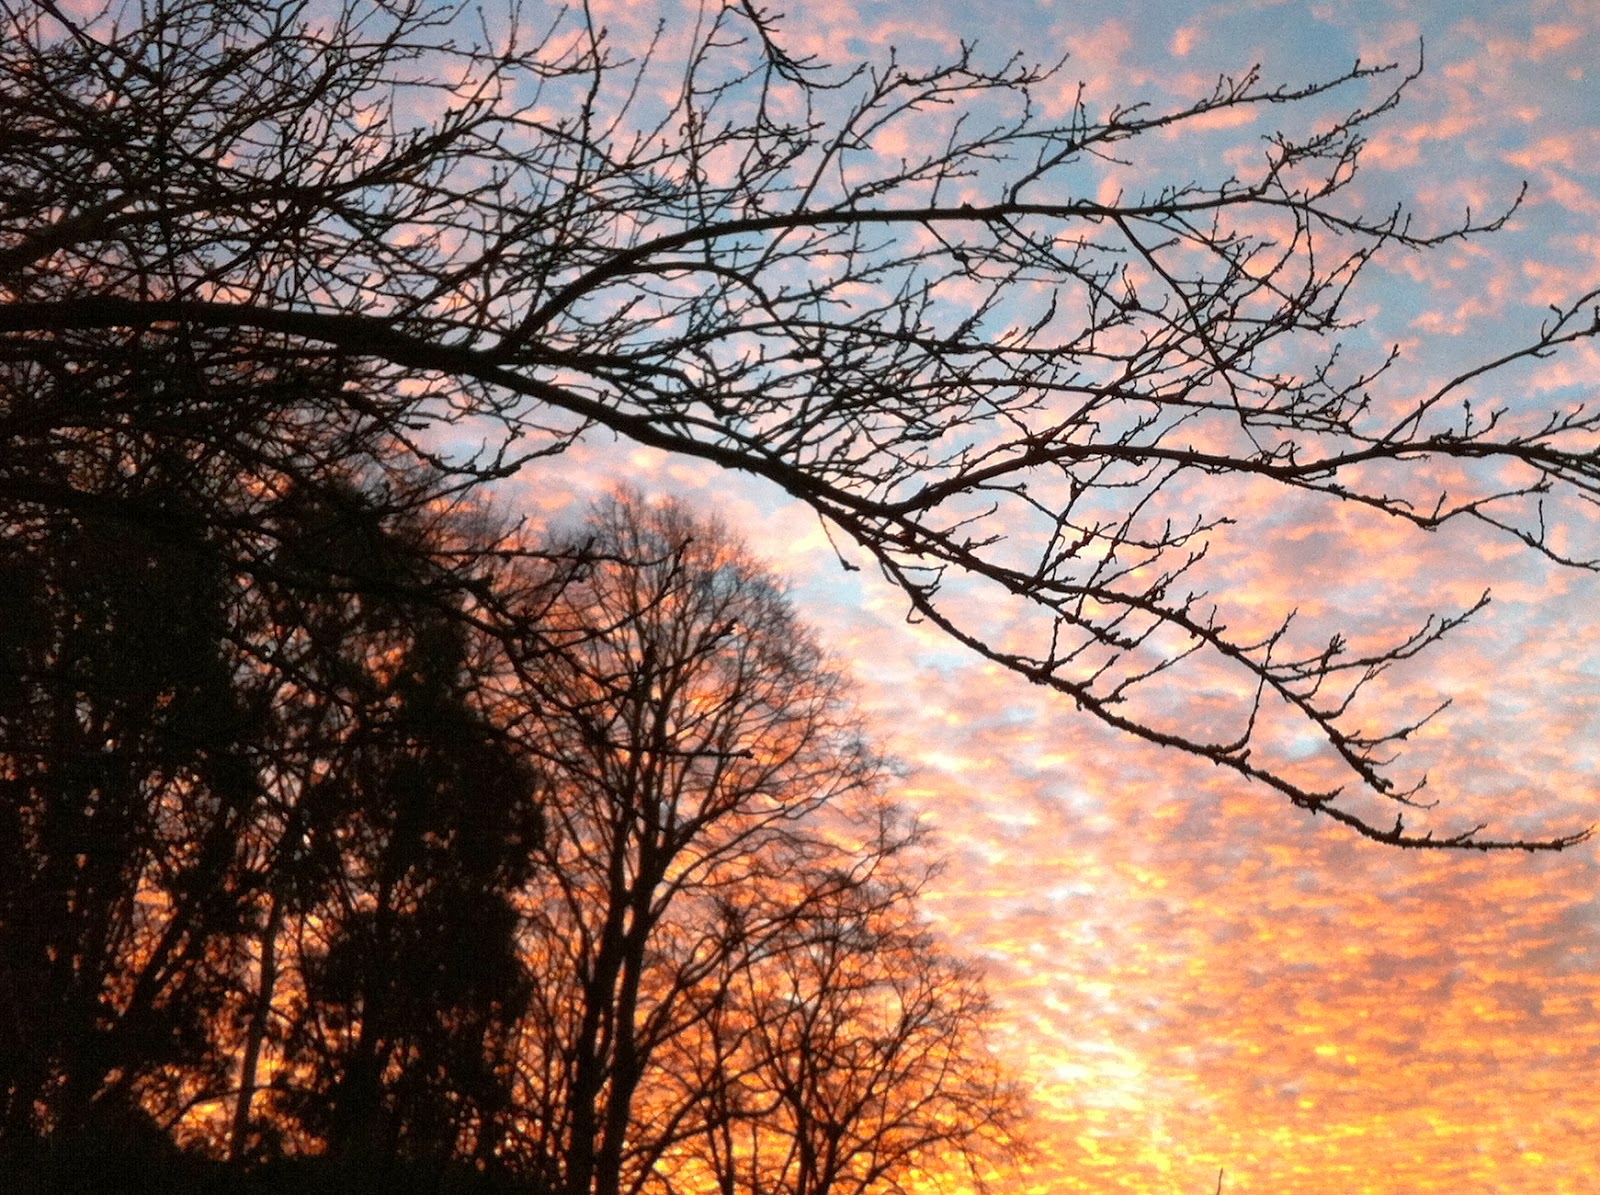 Bare tree branches against sunrise